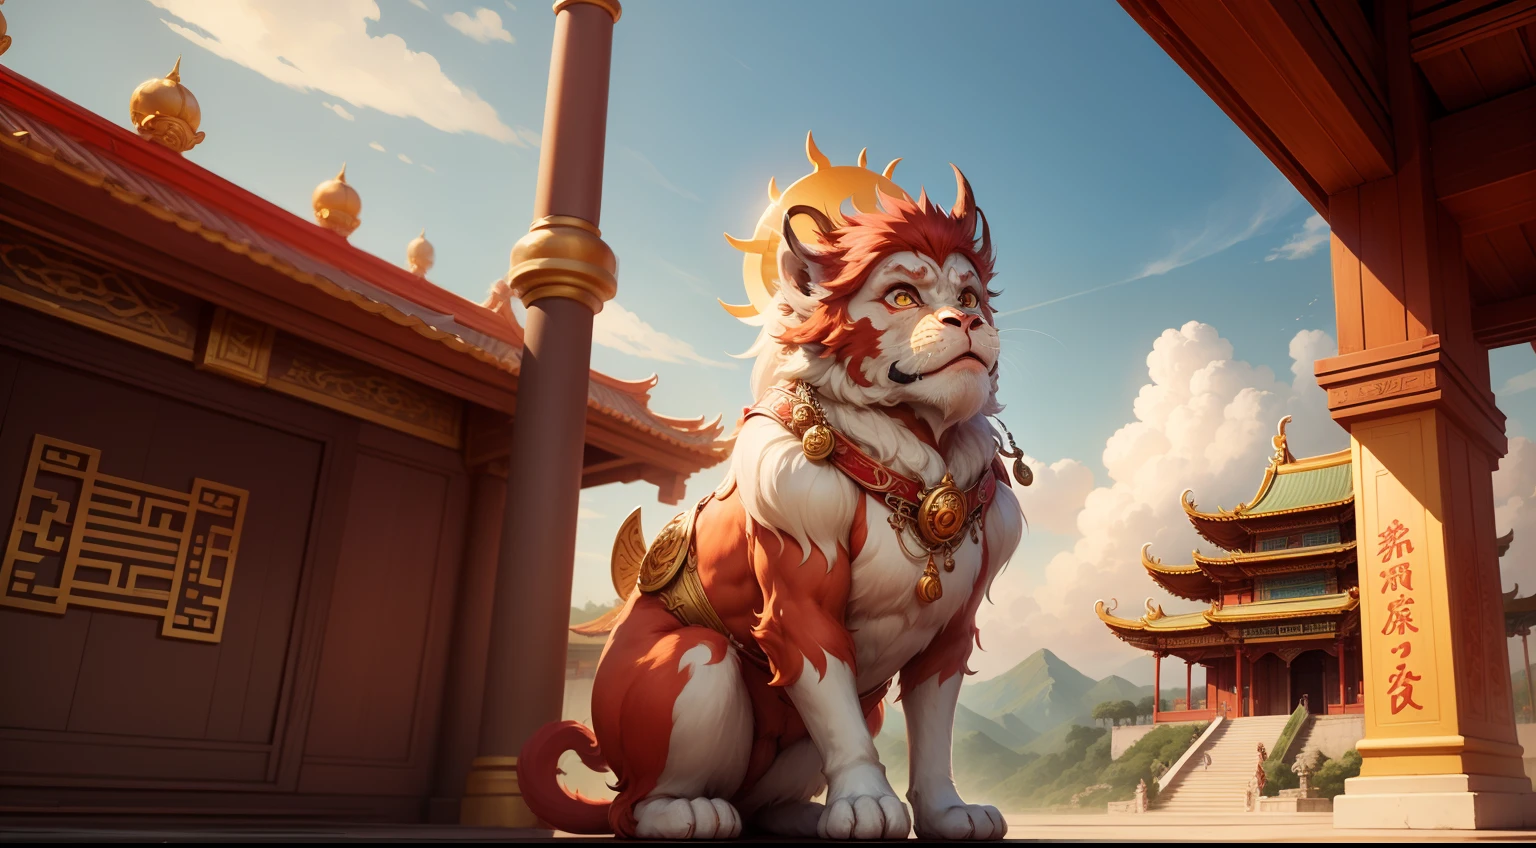 Sun Wukong made a big fuss about the Heavenly Palace